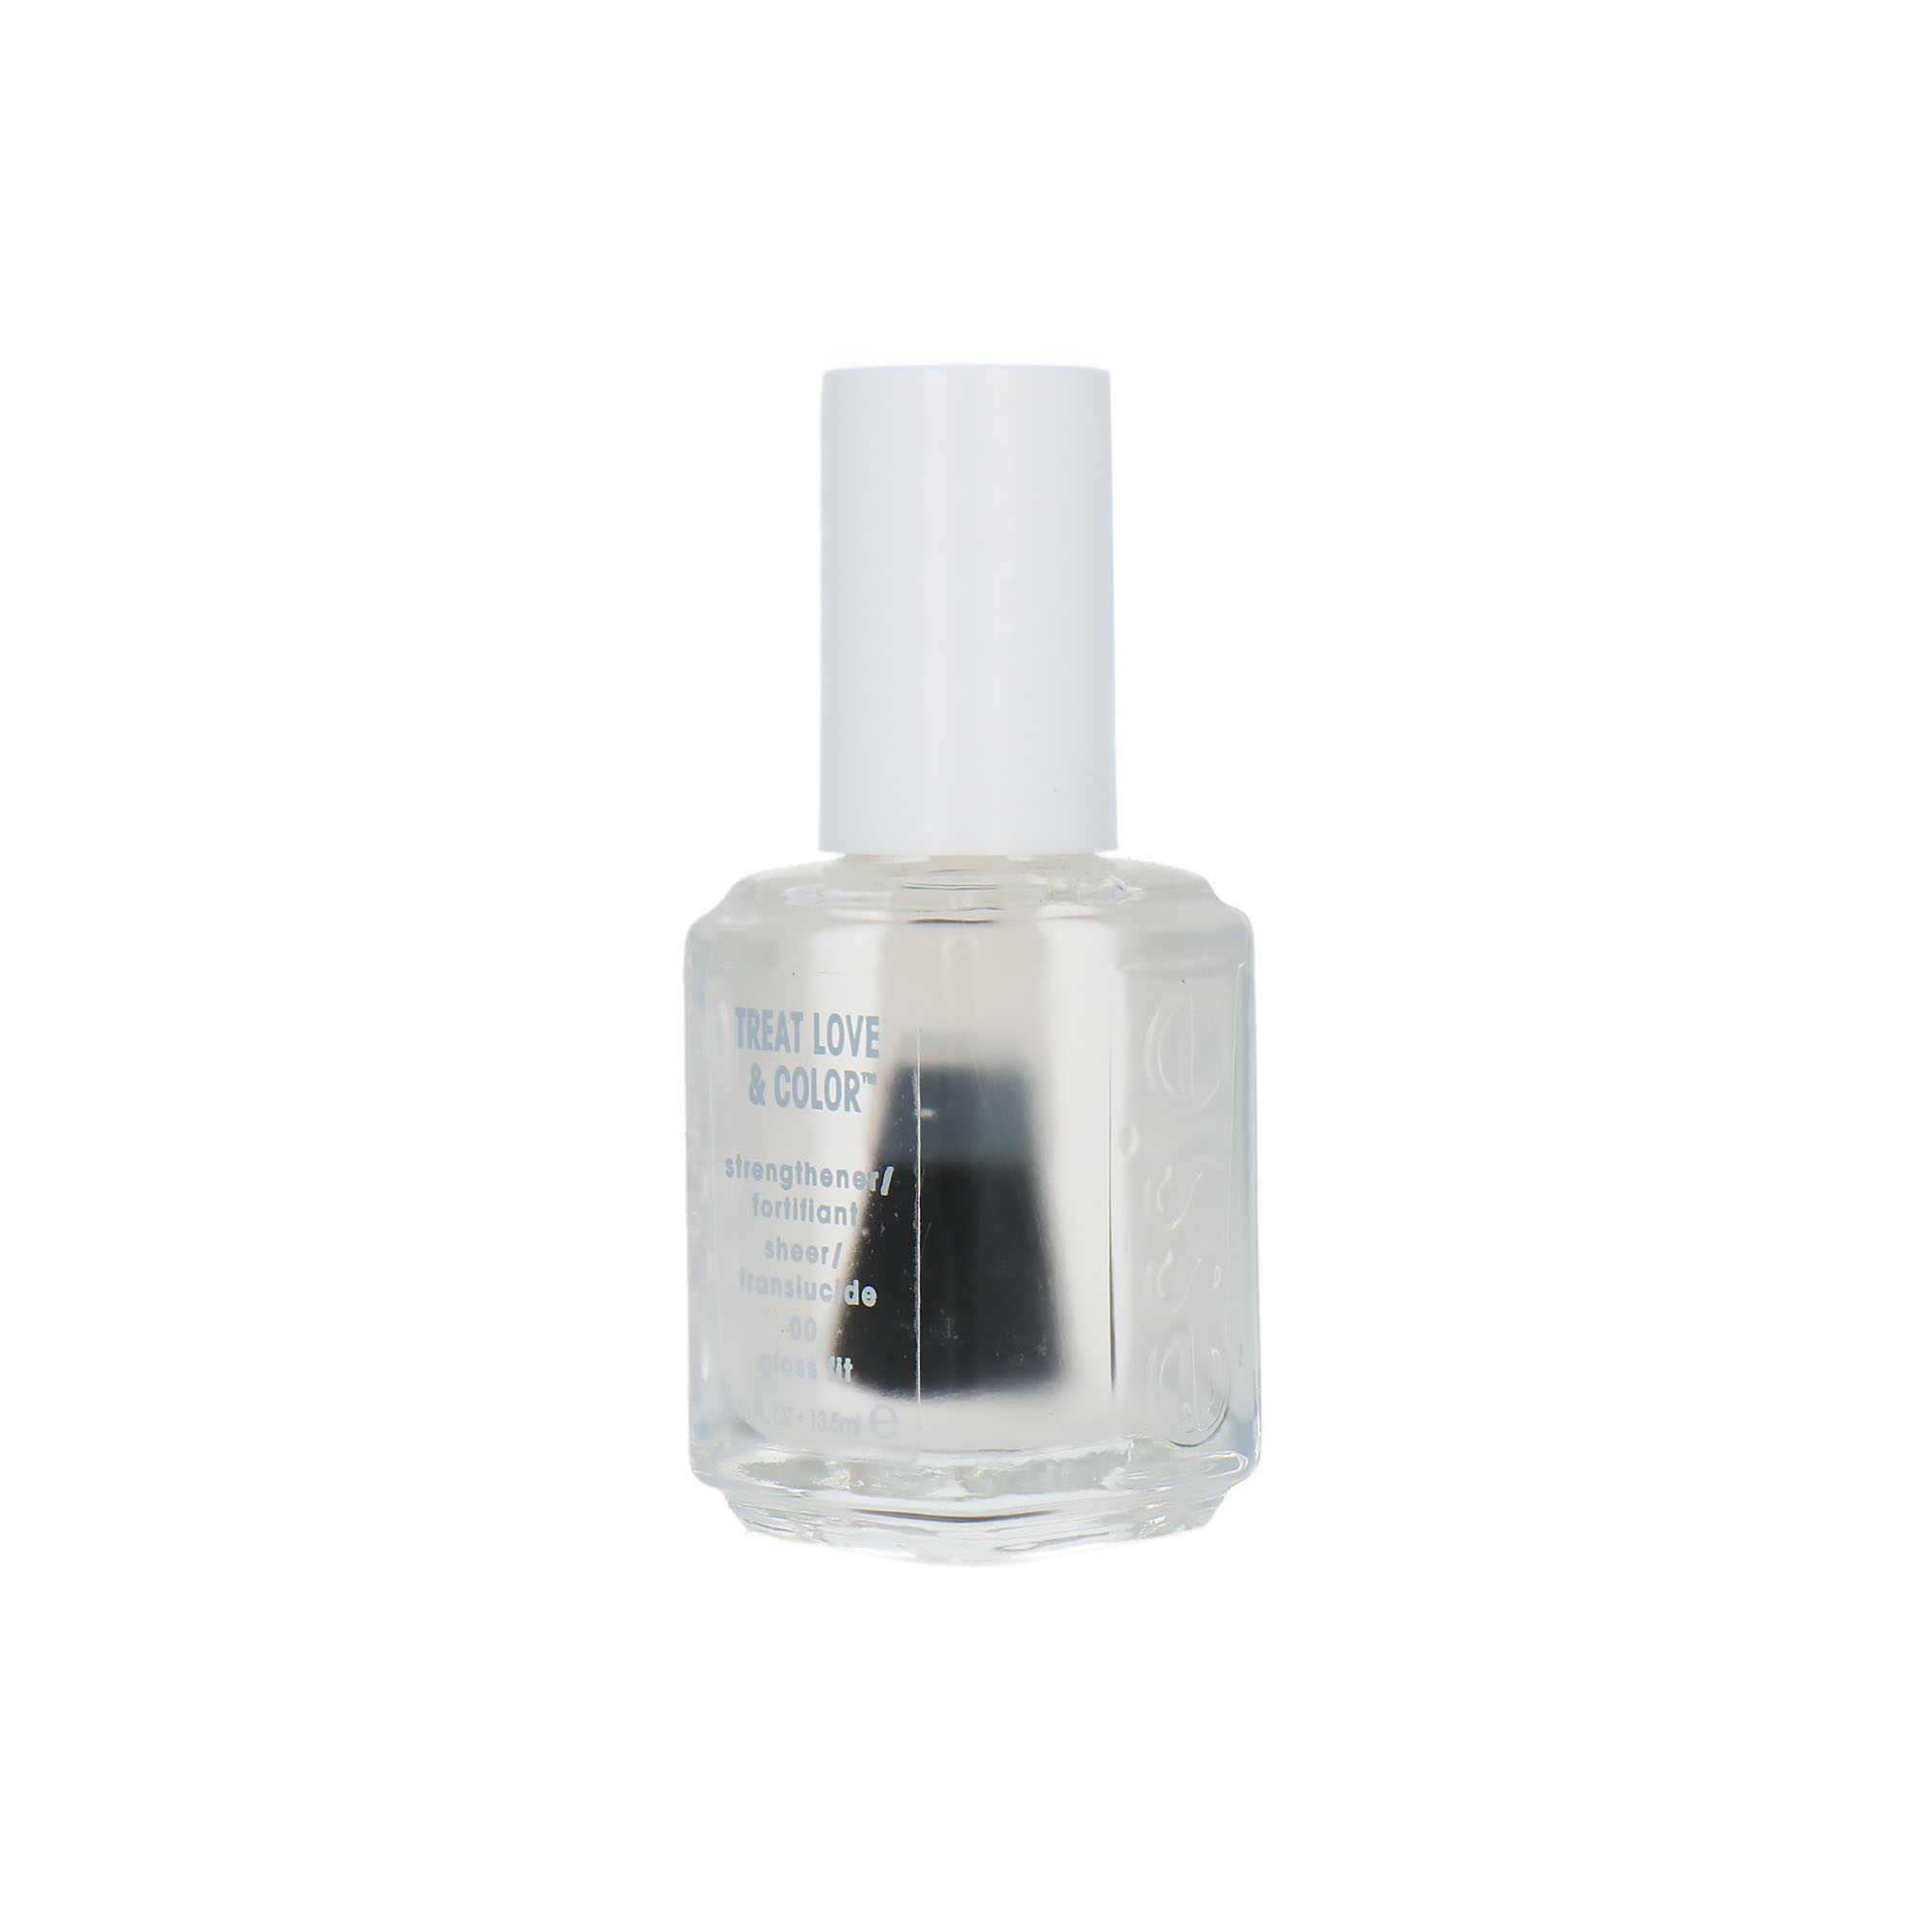 Essie Treat - Fit Nagellack Blisso Love & Kaufen Strengthener Color 00 Gloss 